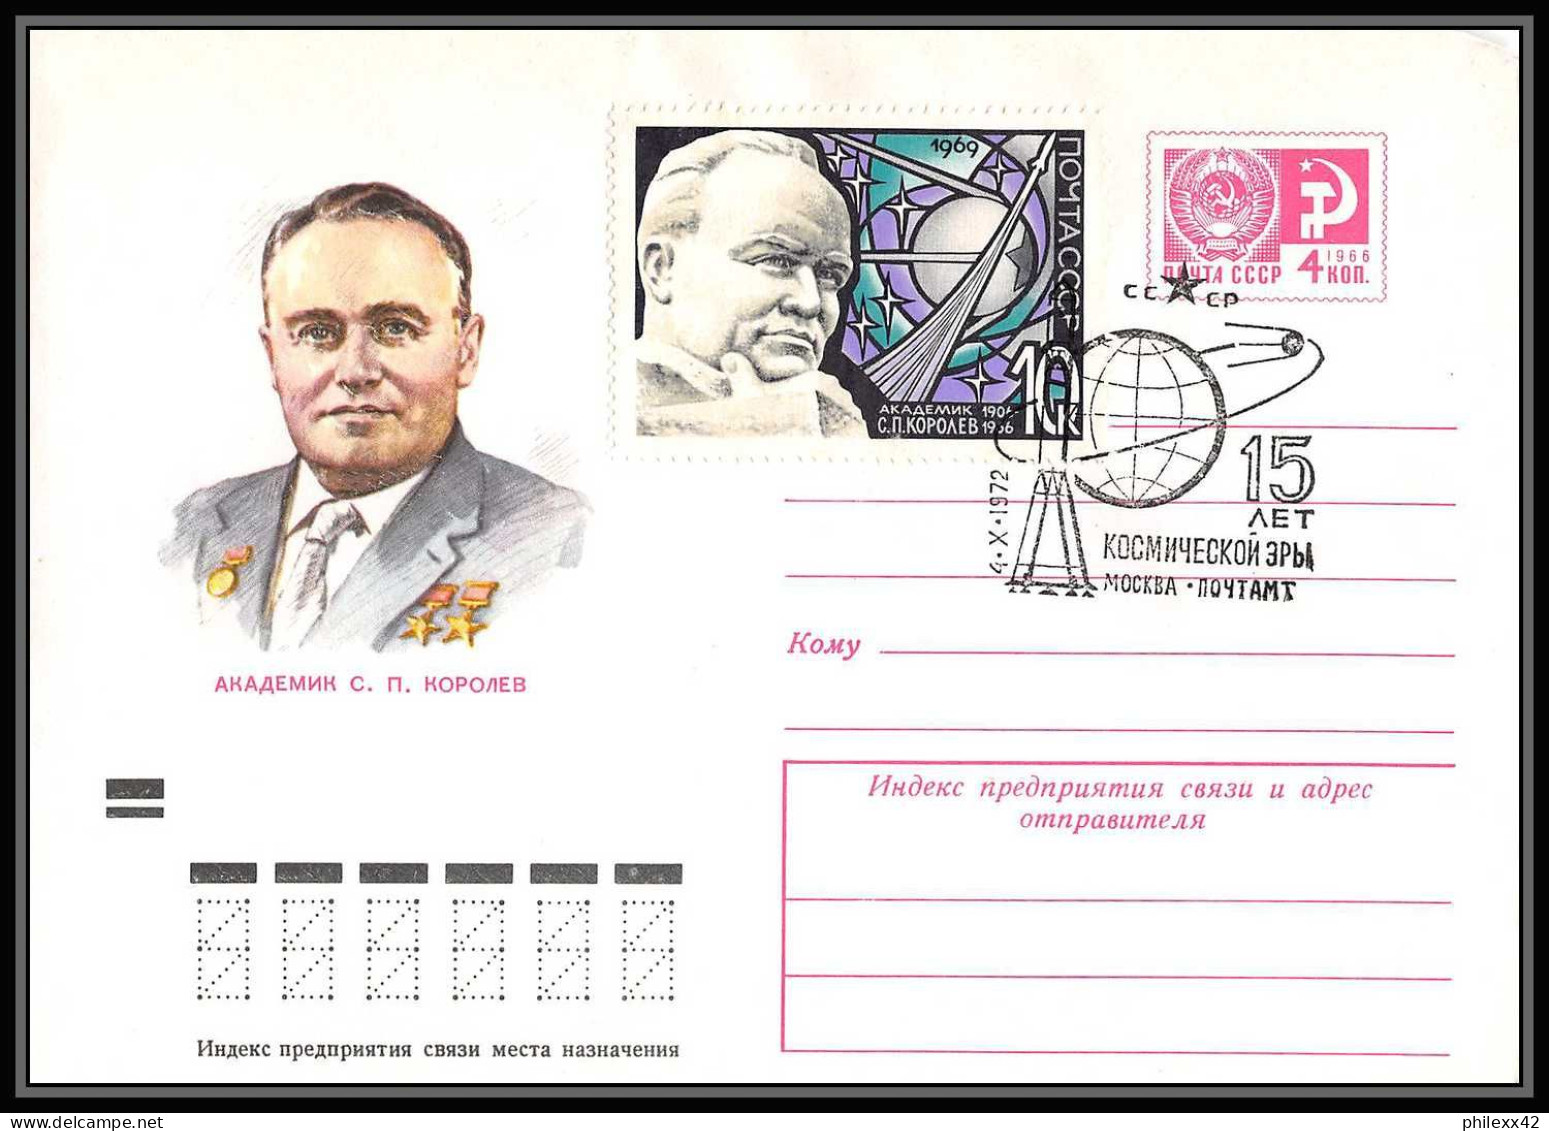 0999 Espace (space Raumfahrt) Entier postal (Stamped Stationery) Russie (Russia urss USSR) 4/10/1972 8 lettres rares